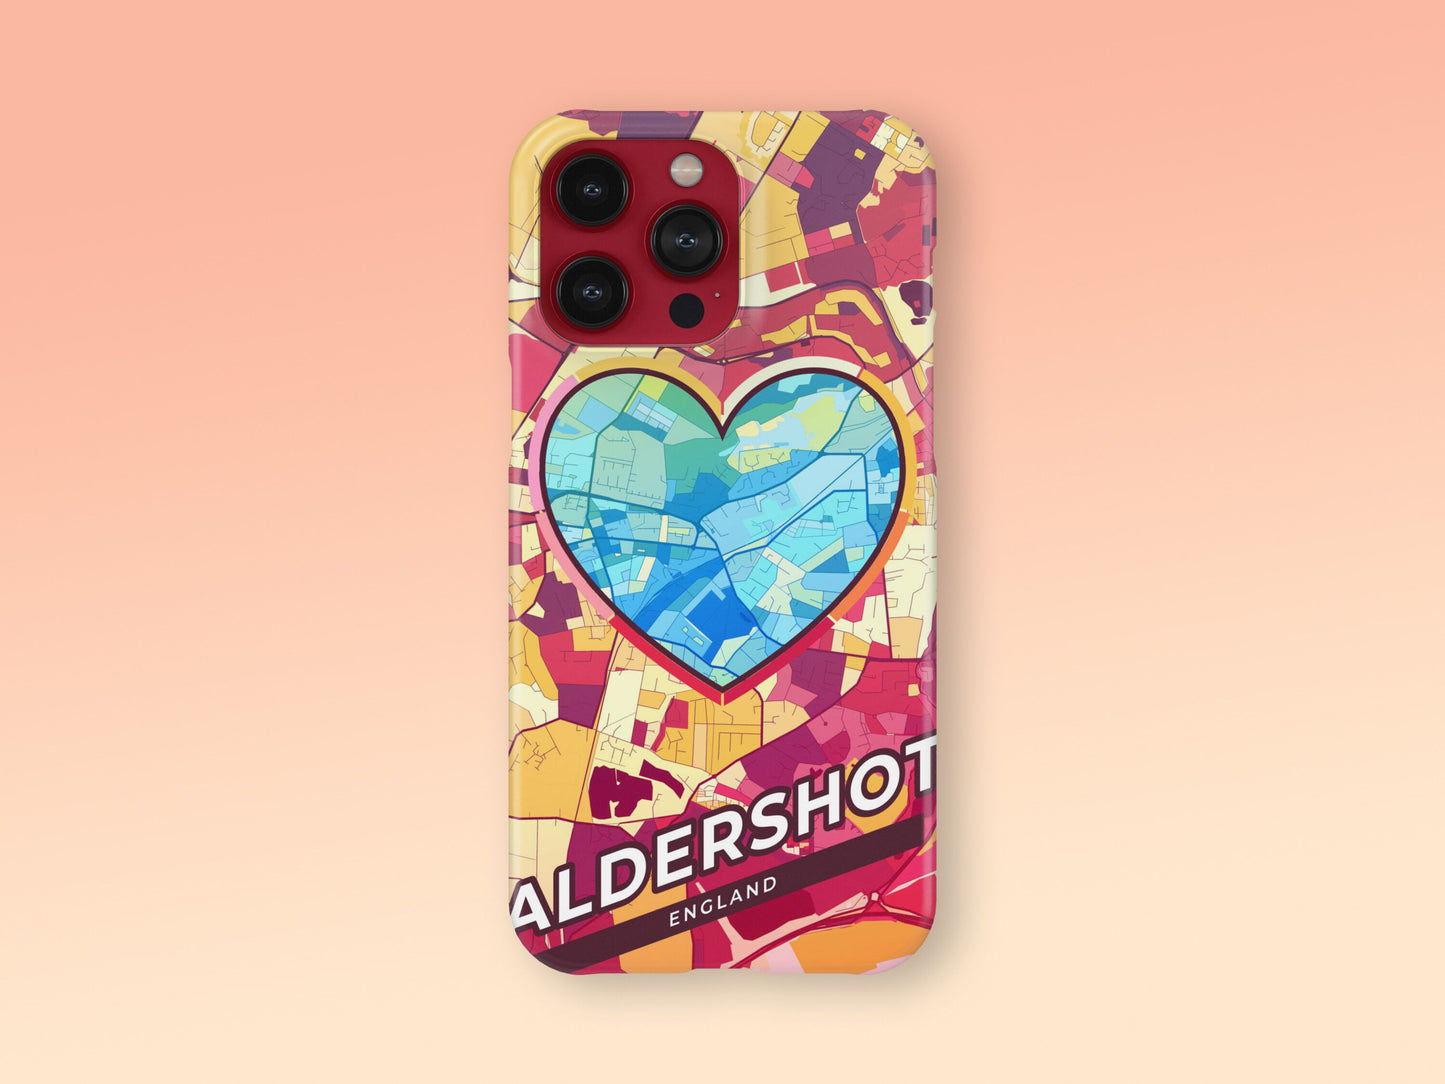 Aldershot England slim phone case with colorful icon. Birthday, wedding or housewarming gift. Couple match cases. 2